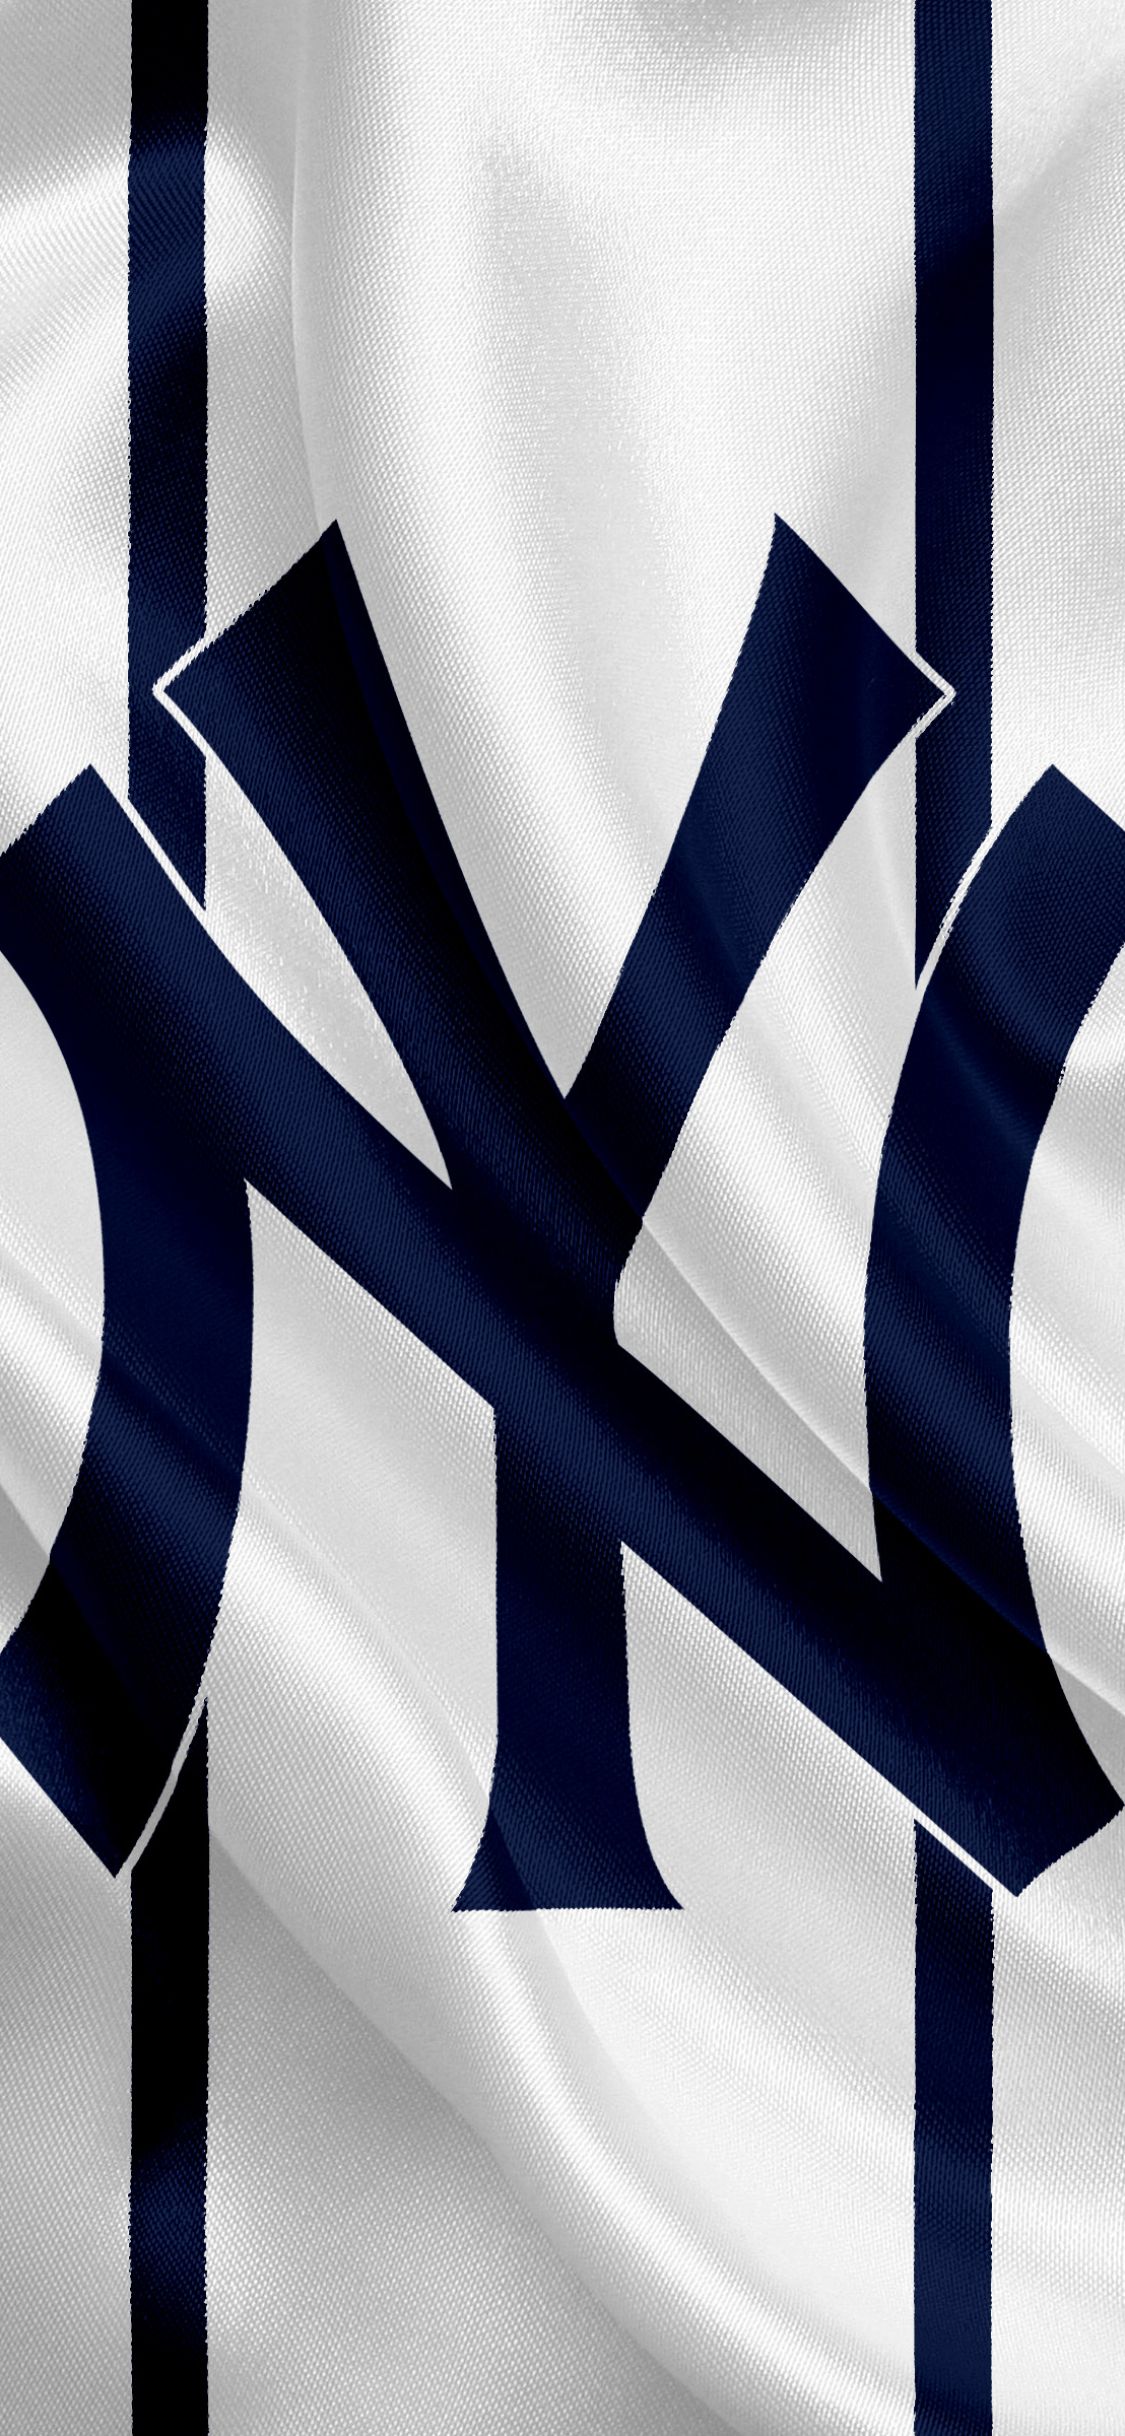 New York Yankees on X: New mobile wallpapers coming in hot 🔥 #GleyberGood   / X